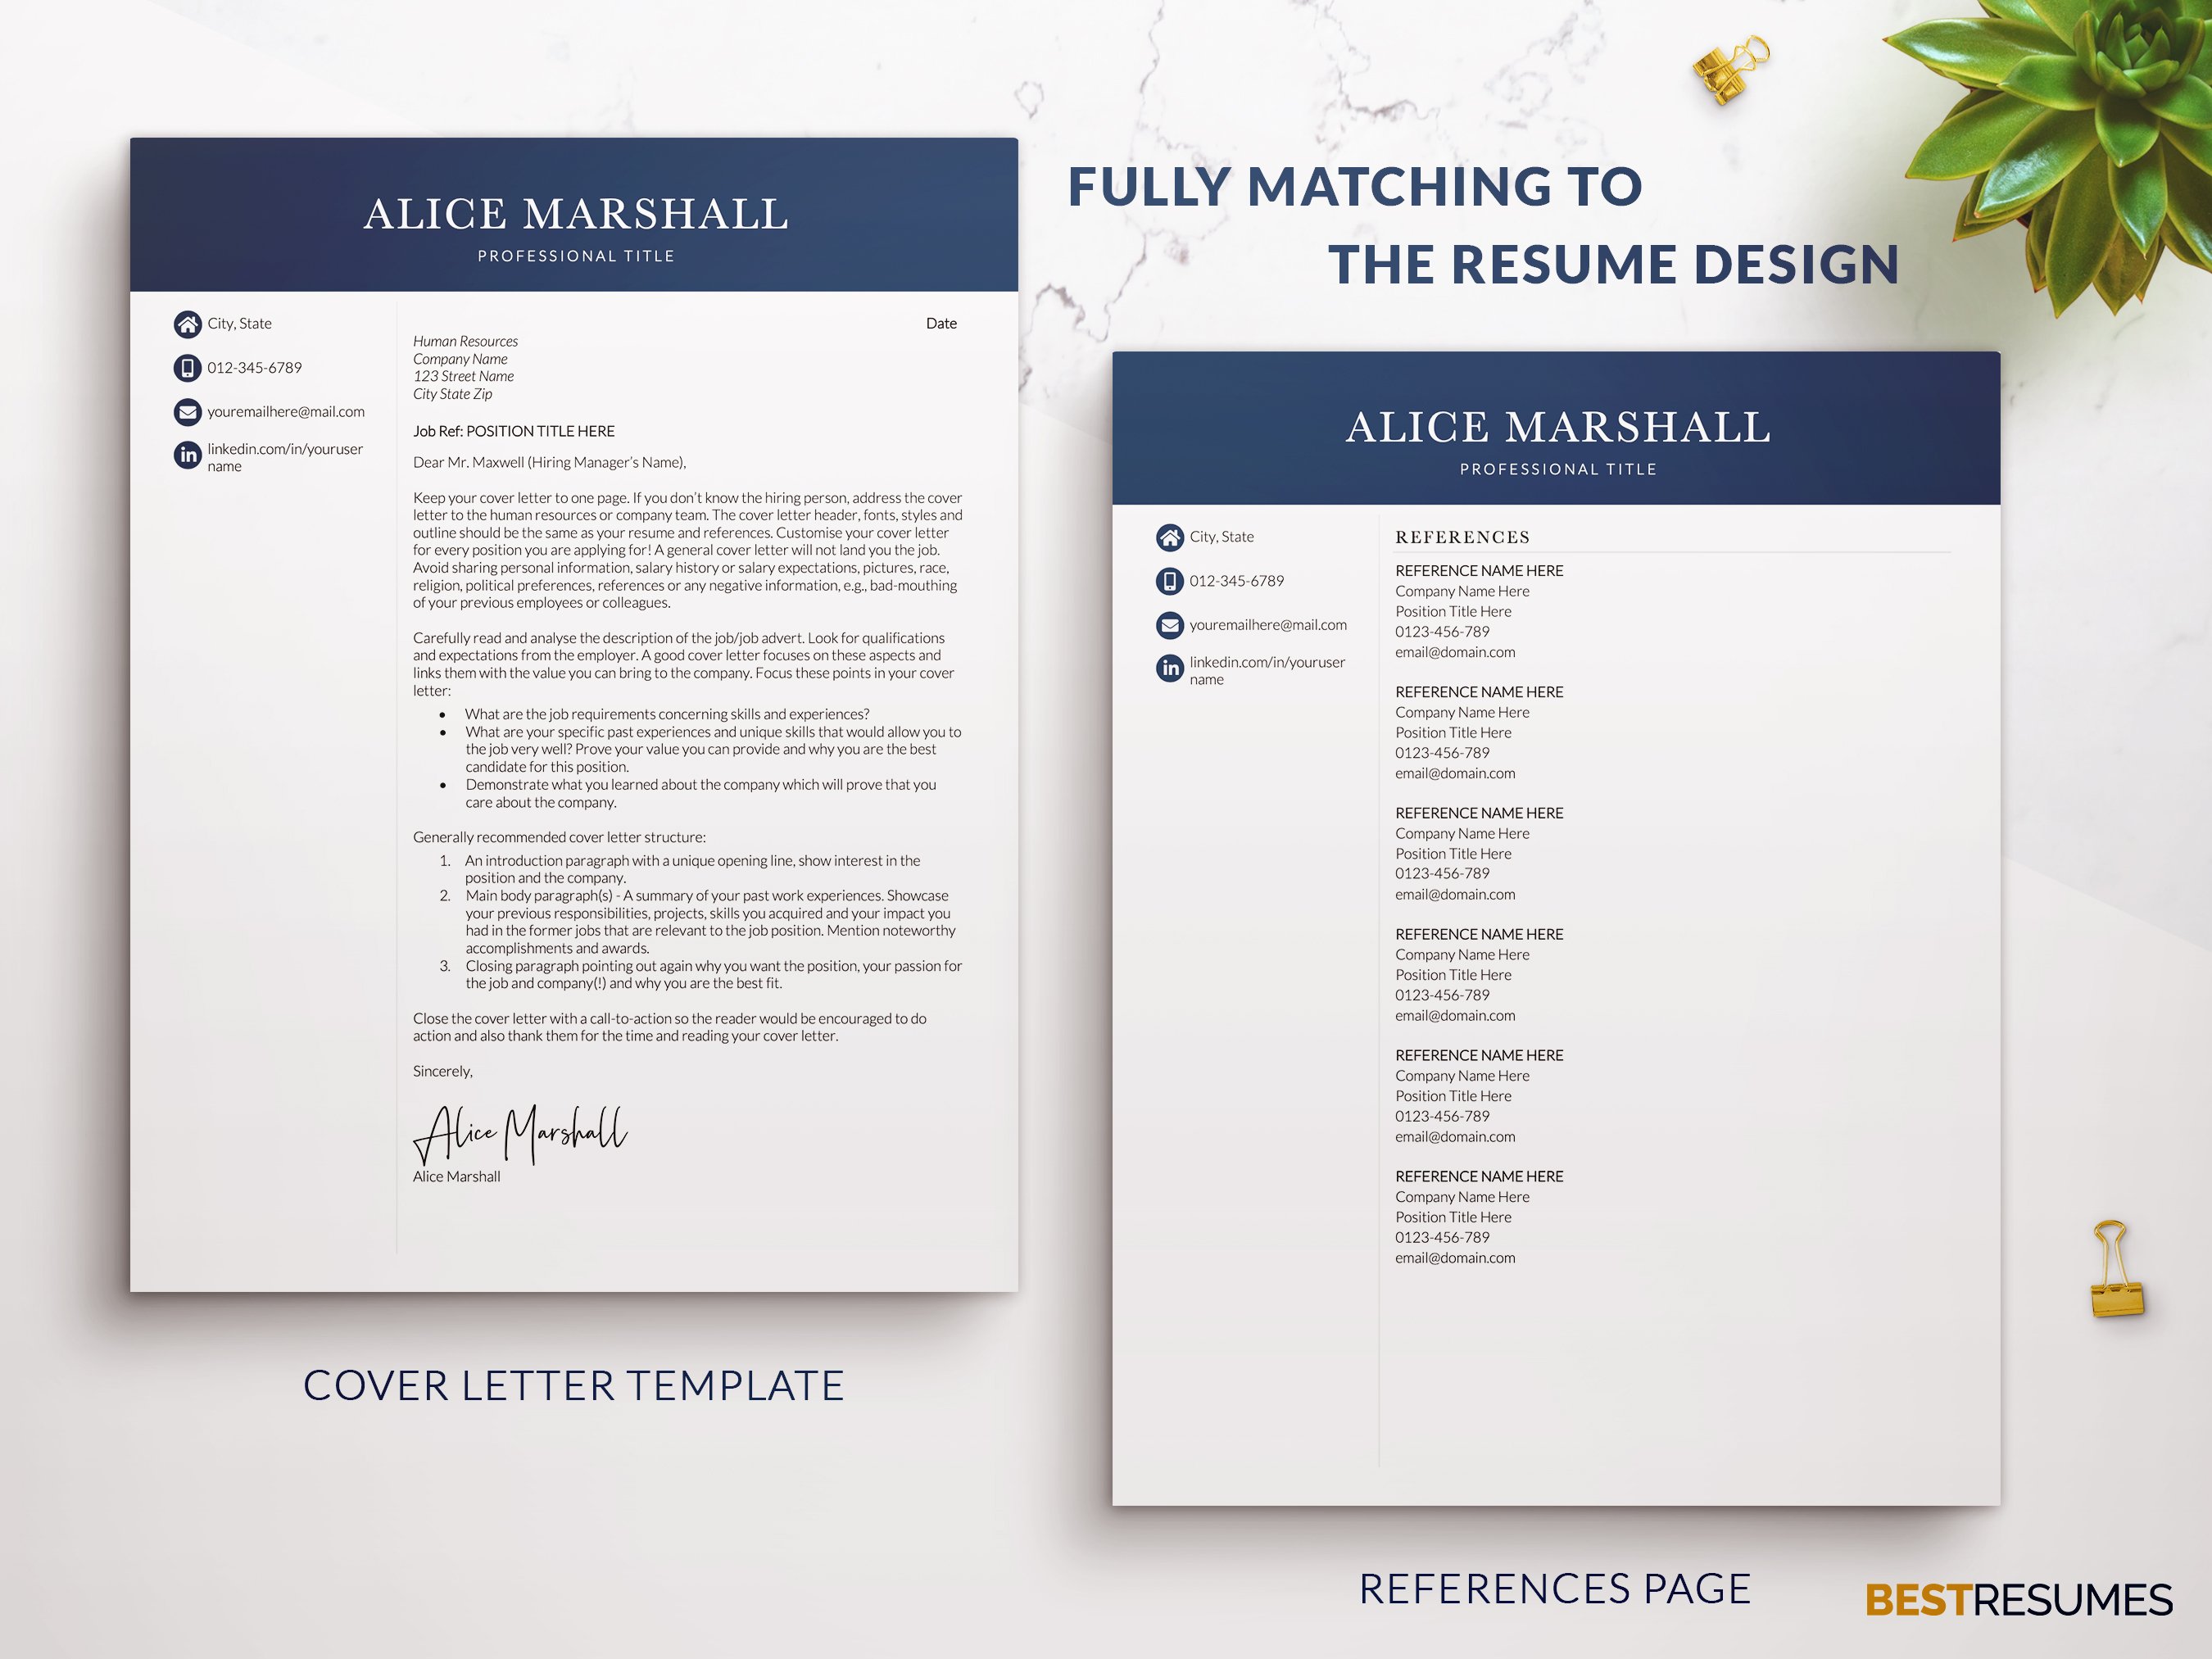 c level resume template cover letter references alice marshall 101